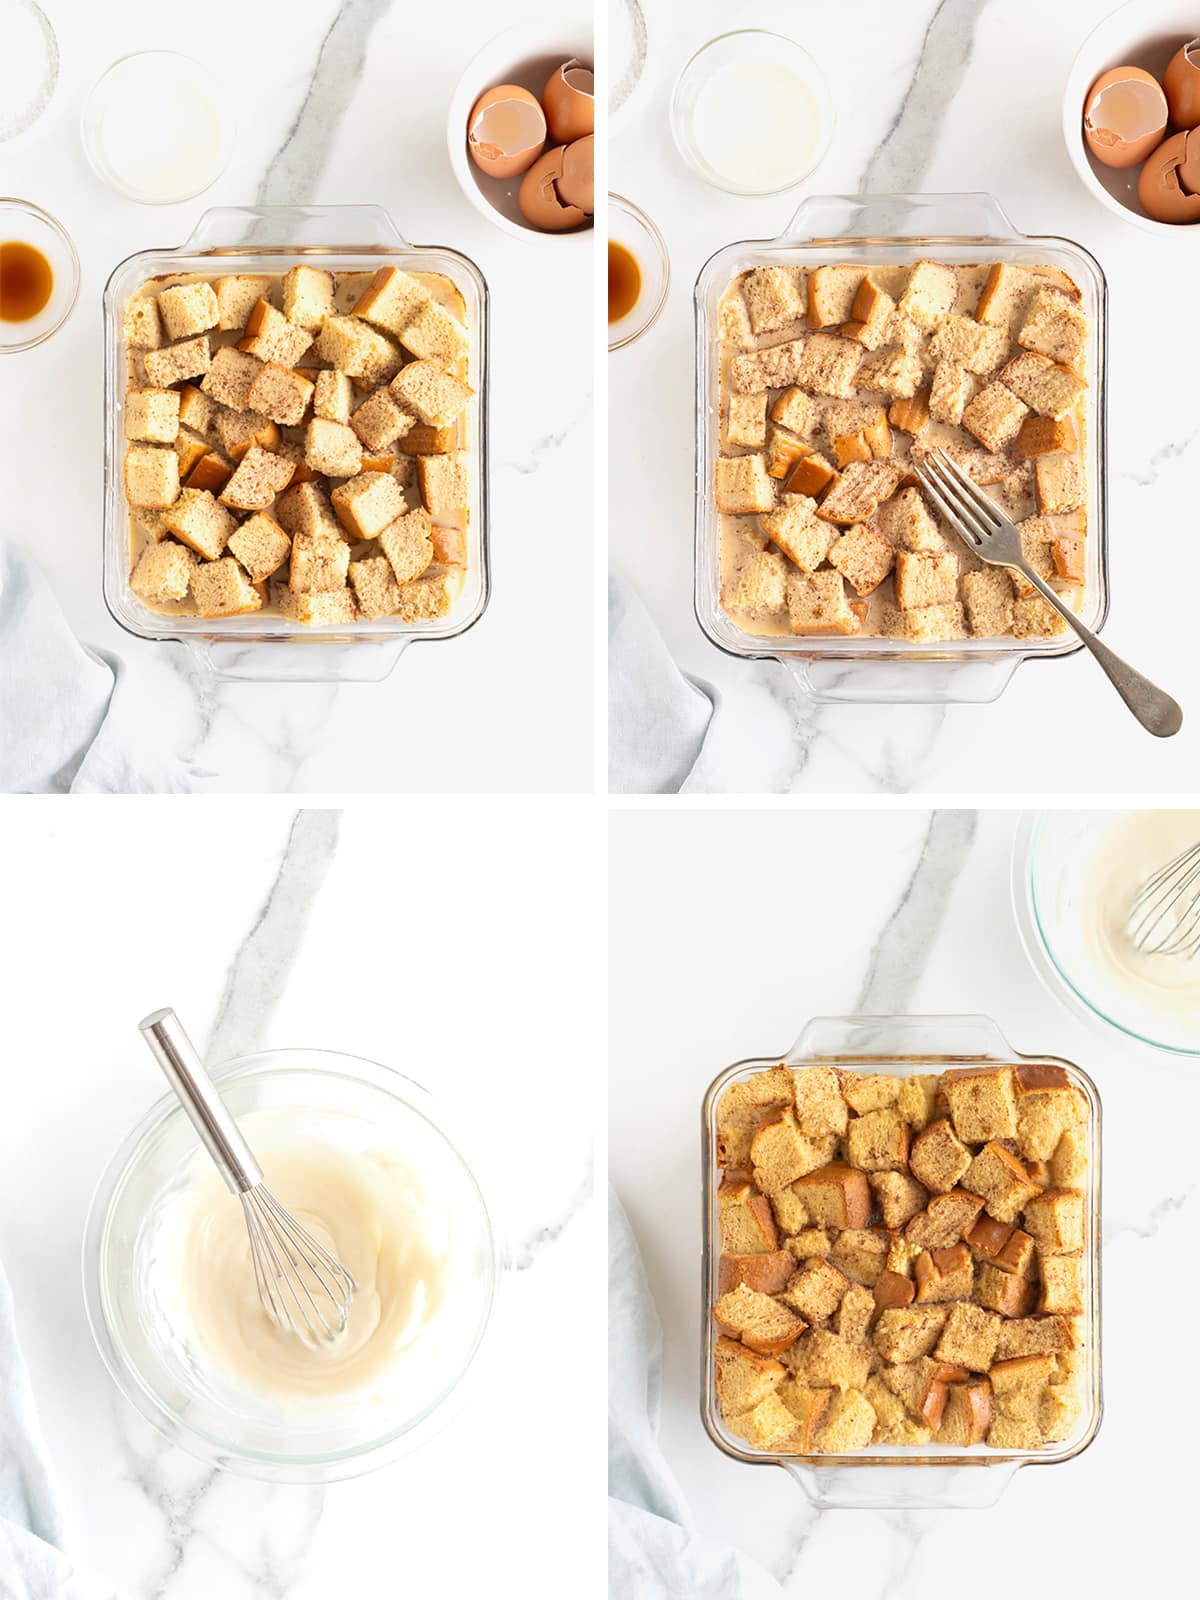 Steps to make bread pudding.